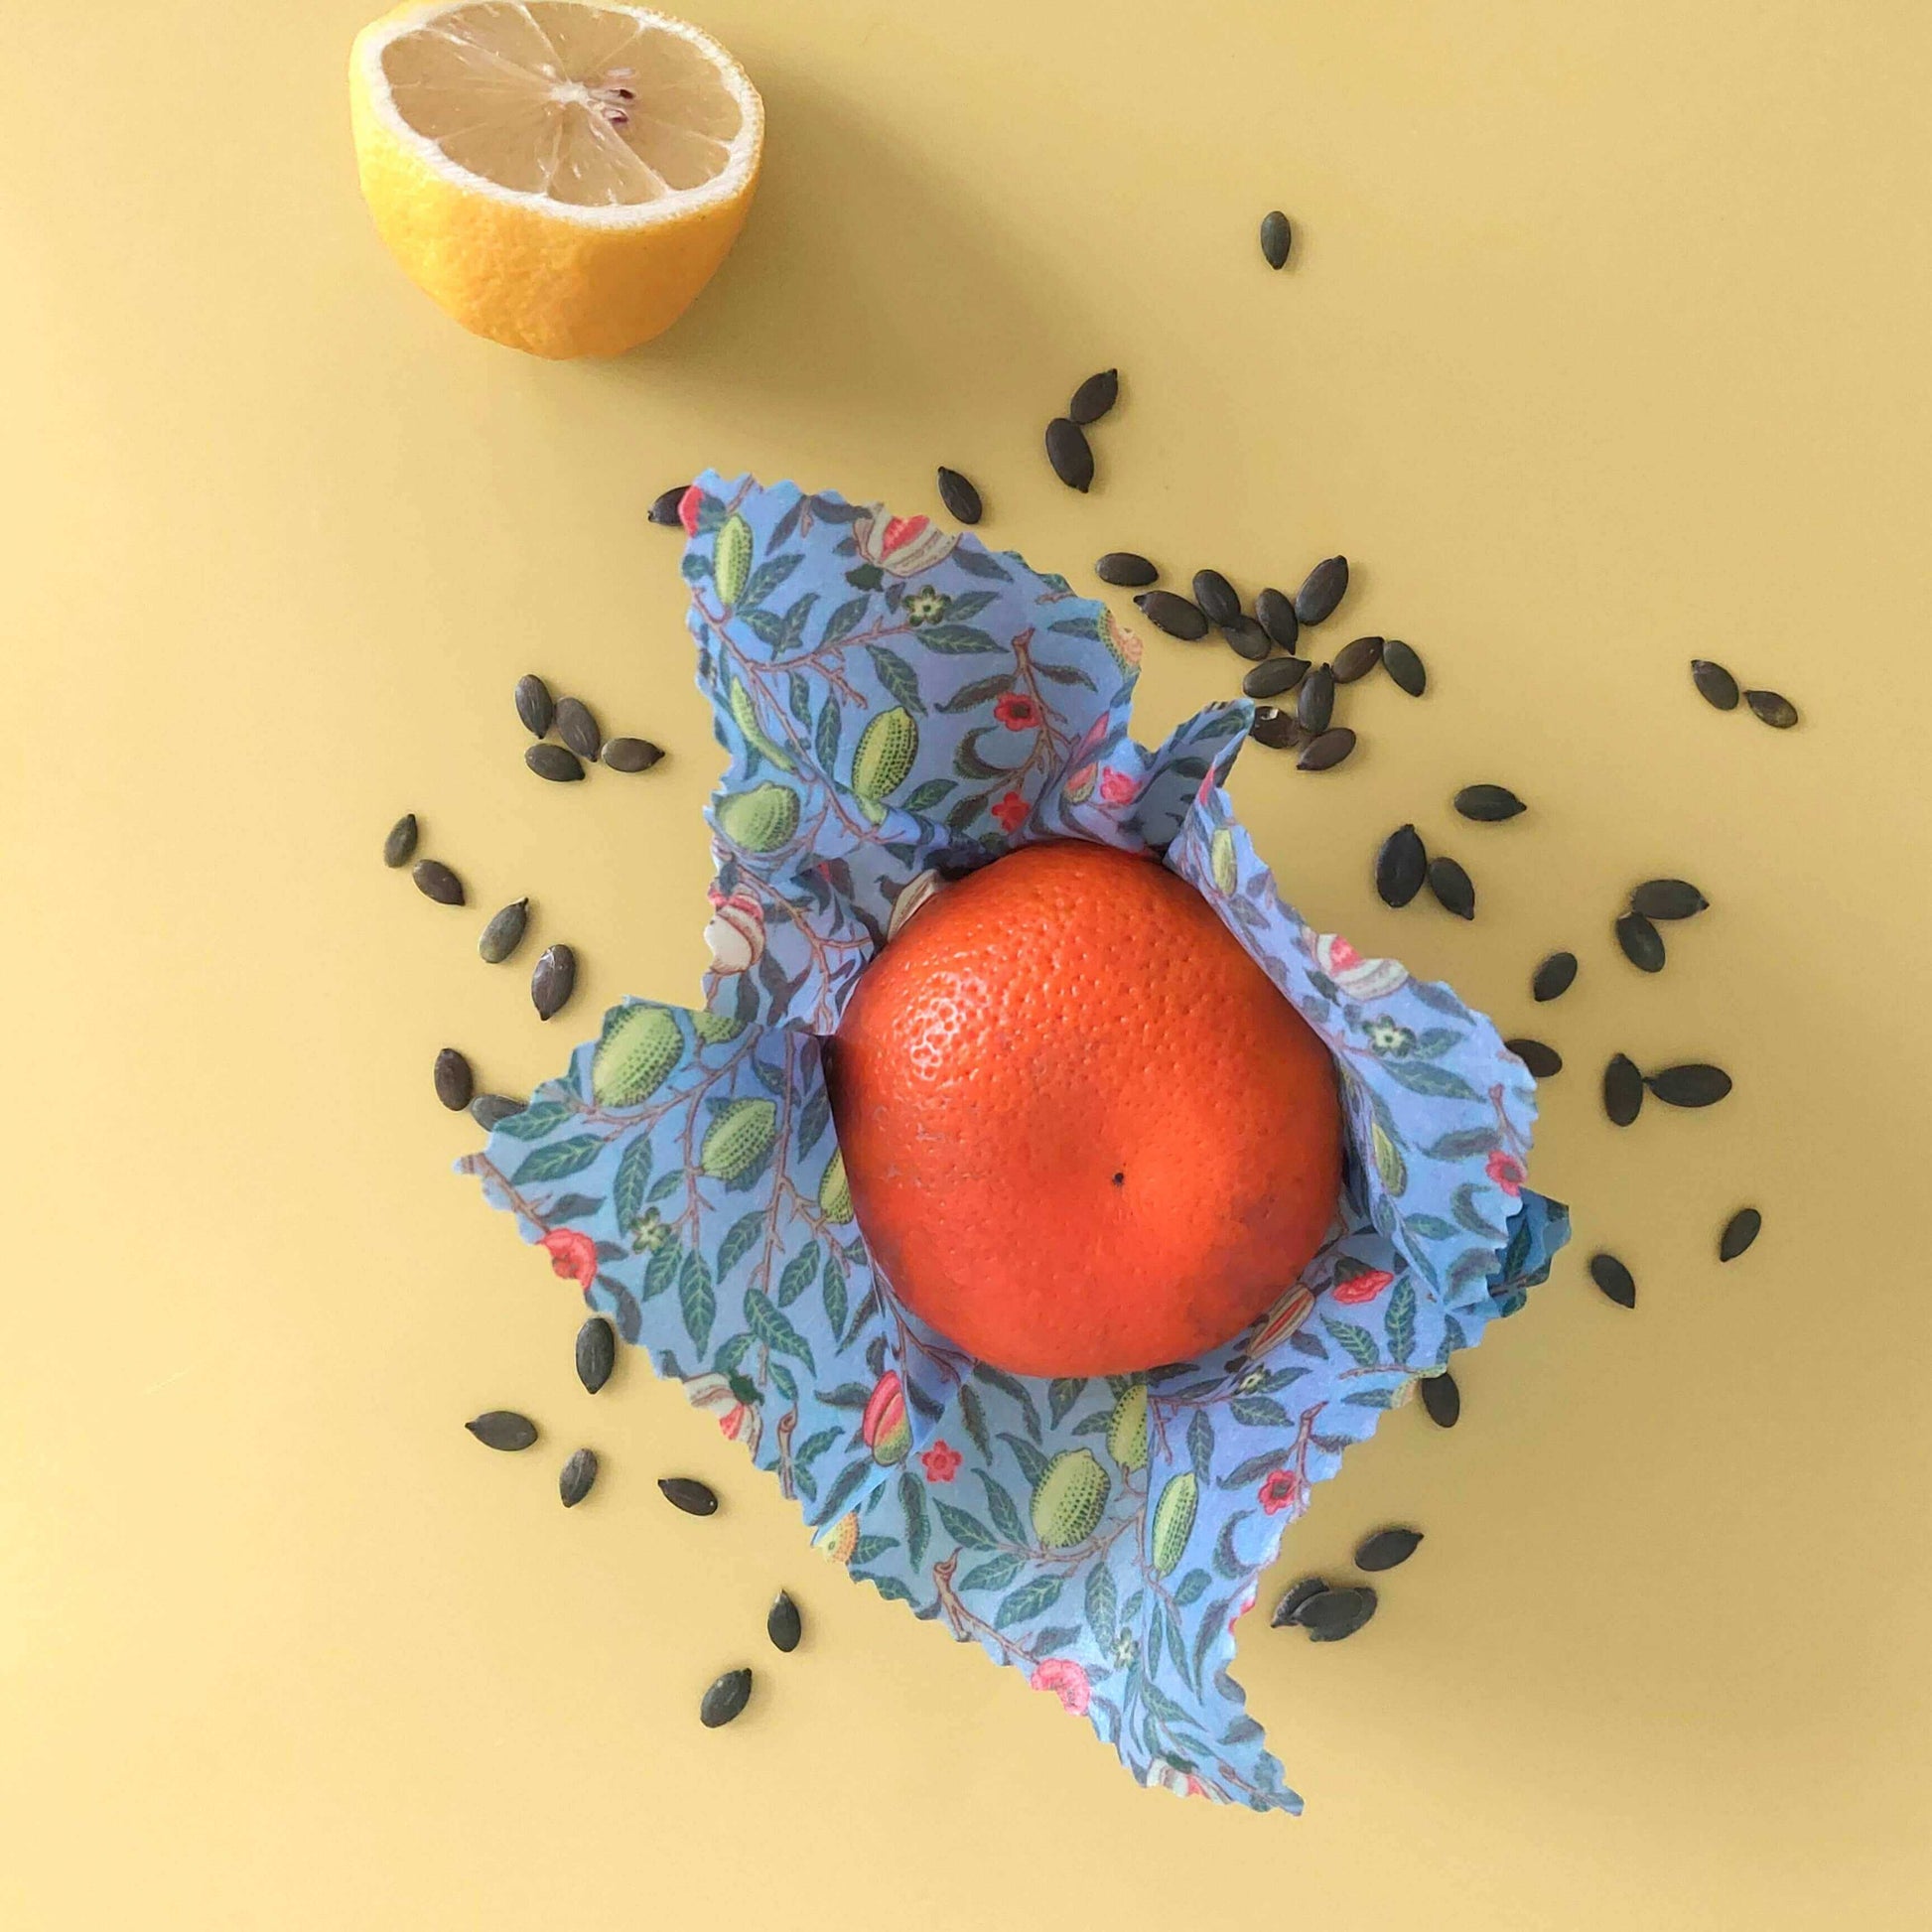 Reusable Beeswax Food Wraps 100% Hand Made in the UK by Honey Bee Good shown in William Morris Pomegranate lifestyle